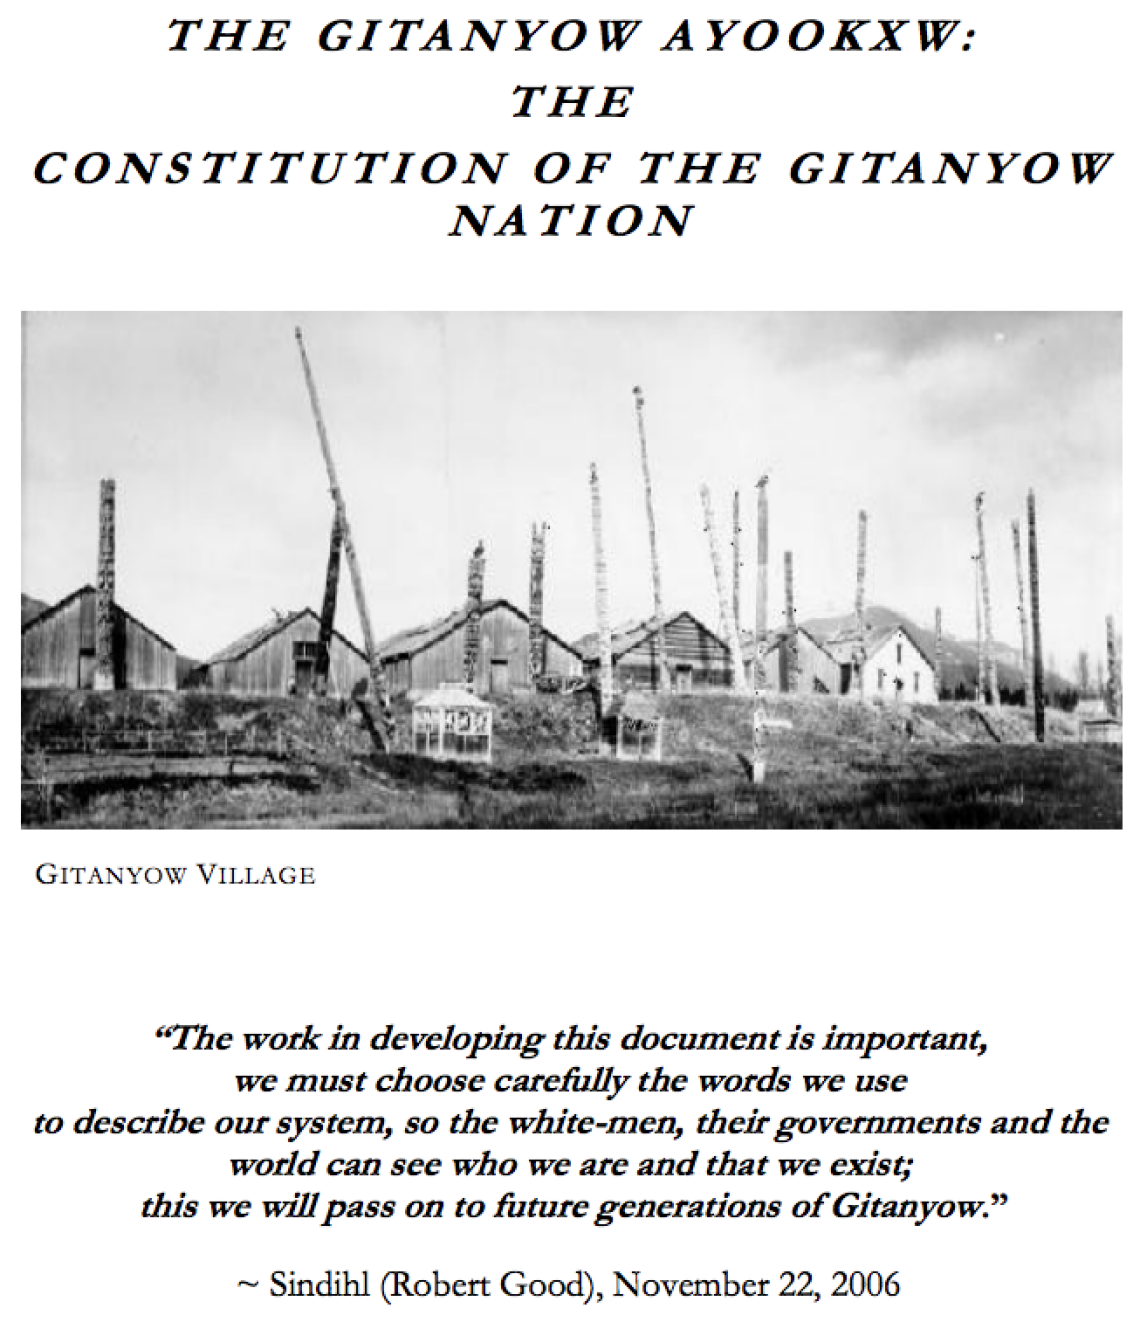 The Gitanyow Ayookxw: The Constitution of the Gitanyow Nation